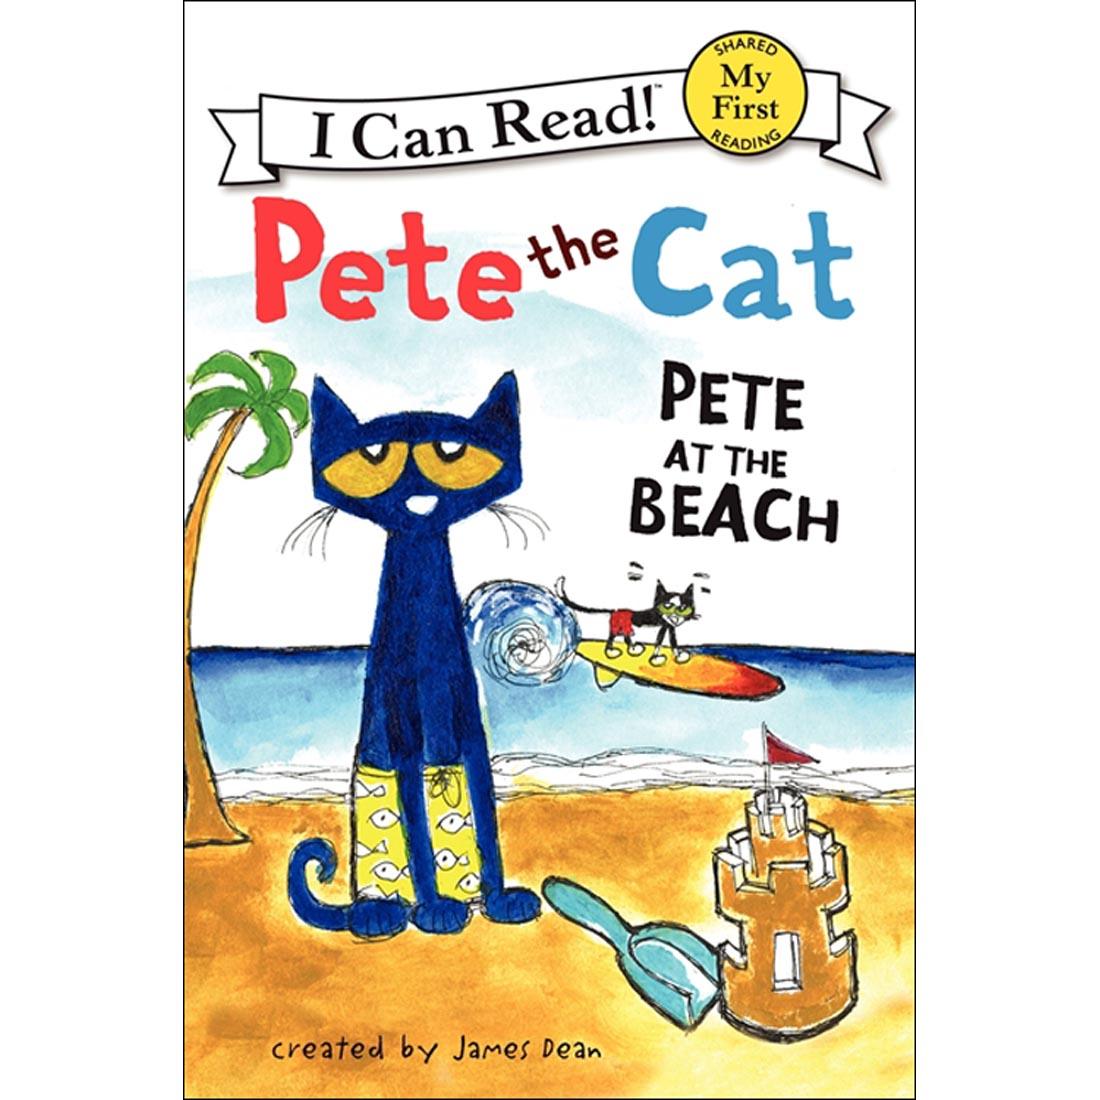 Pete The Cat: Pete At The Beach - A My First I Can Read Book, Shared Reading